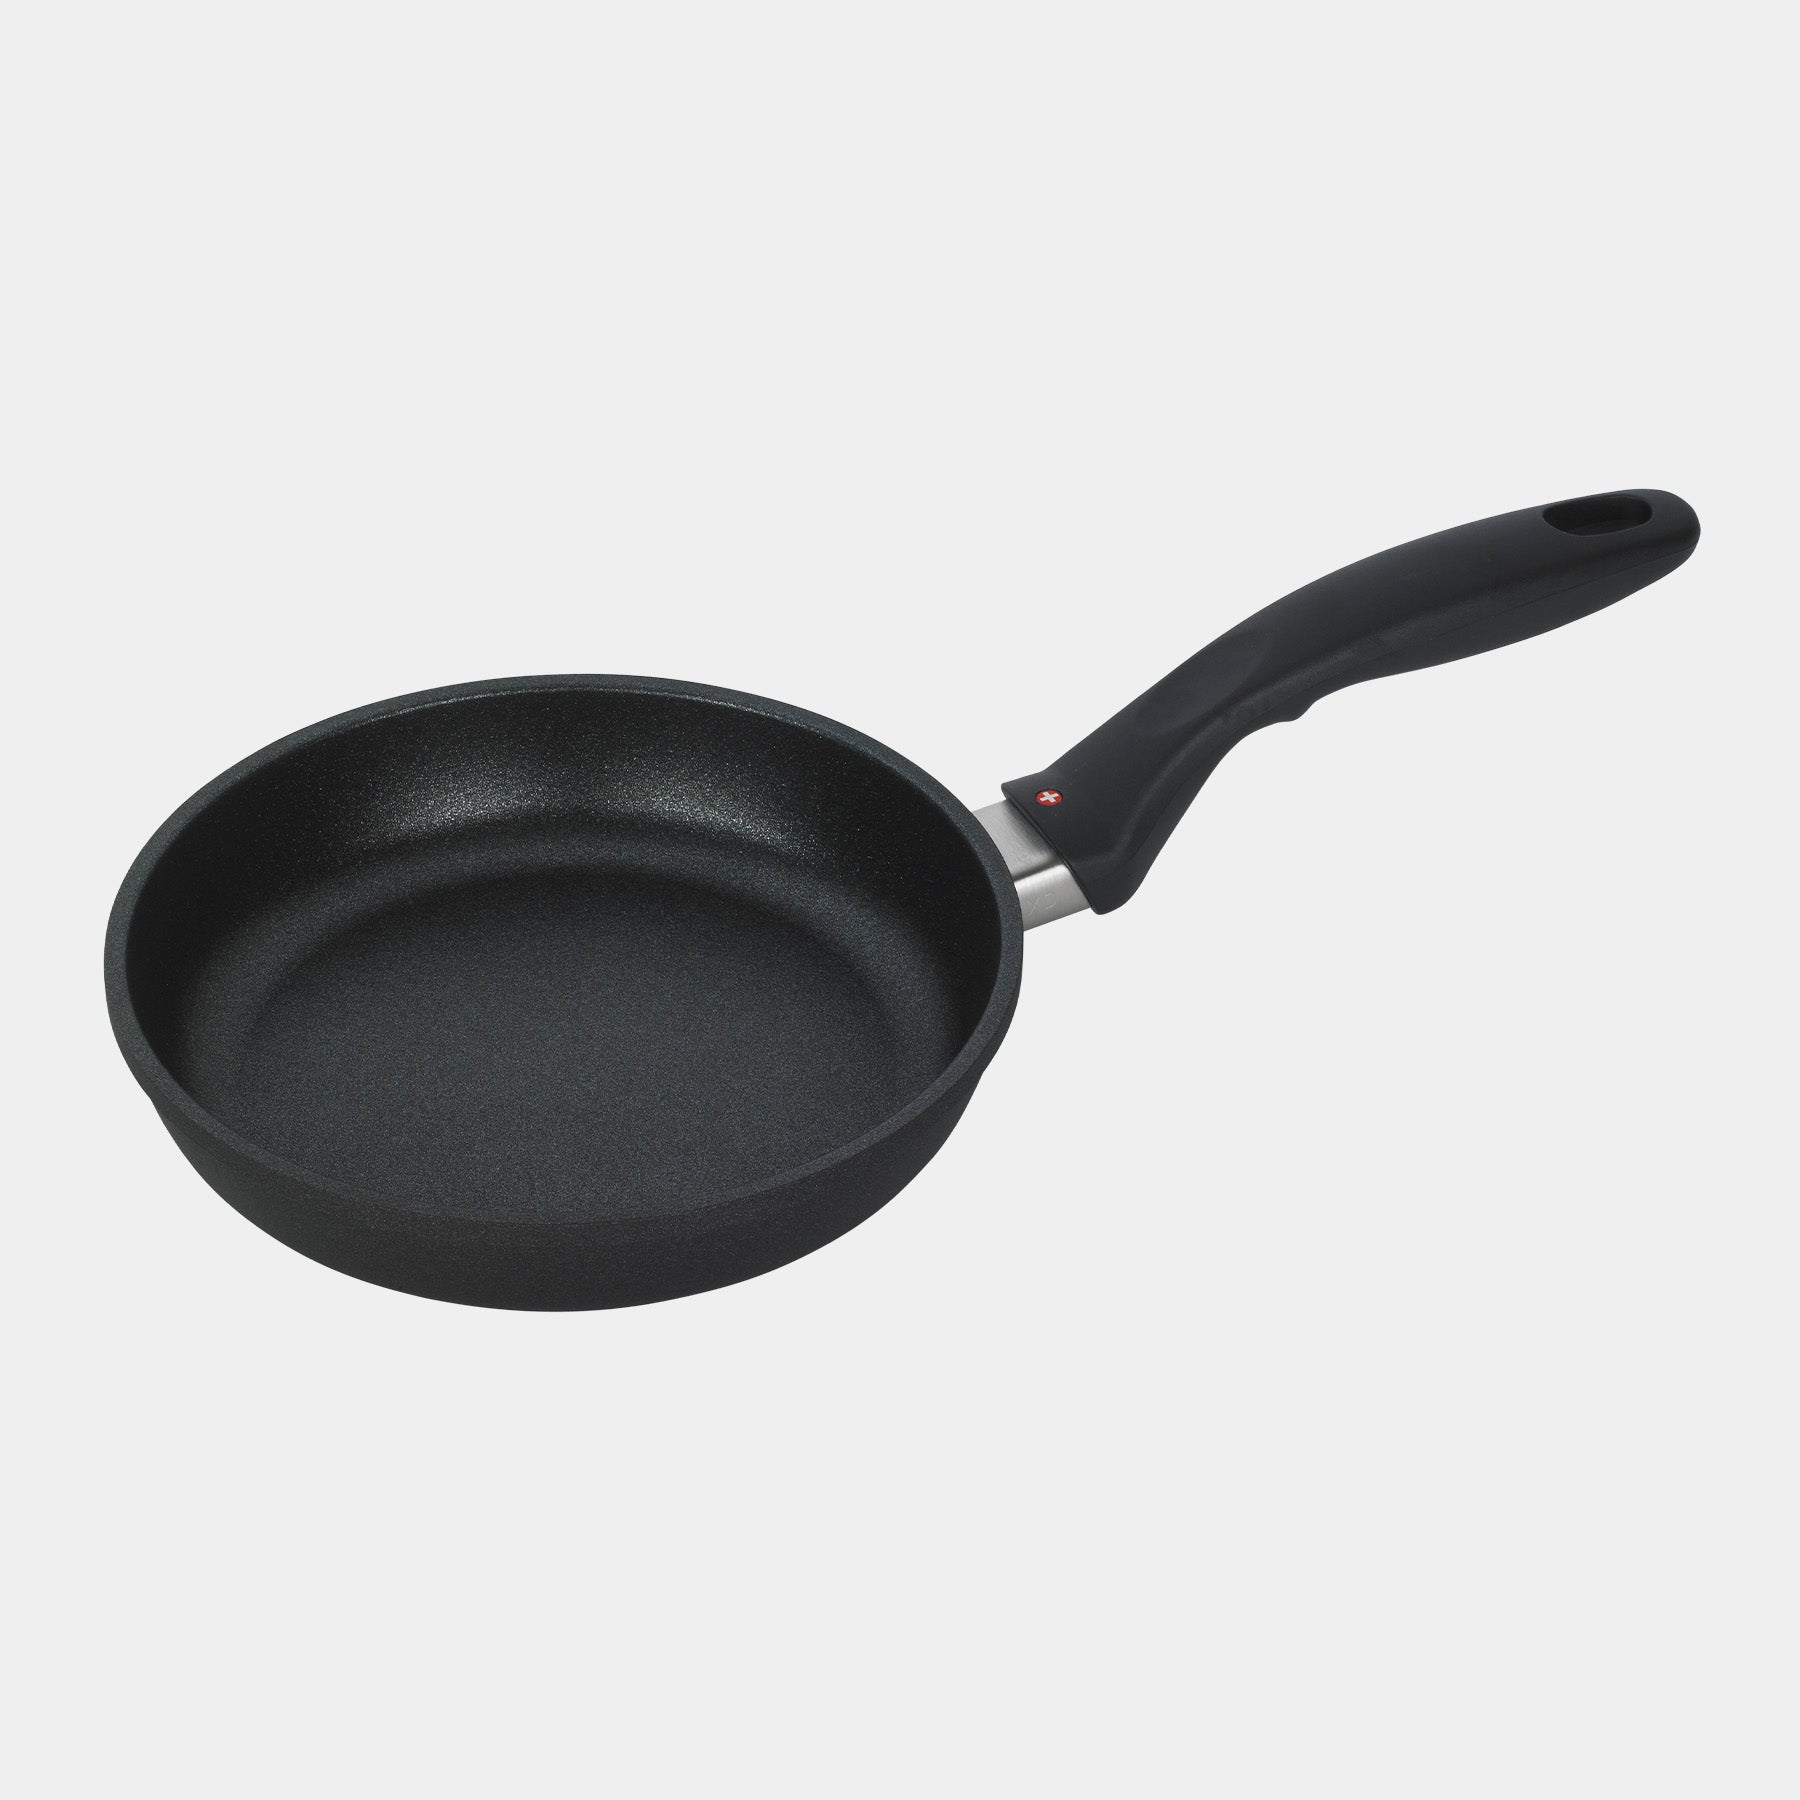 XD Nonstick 8" Fry Pan - Induction top view